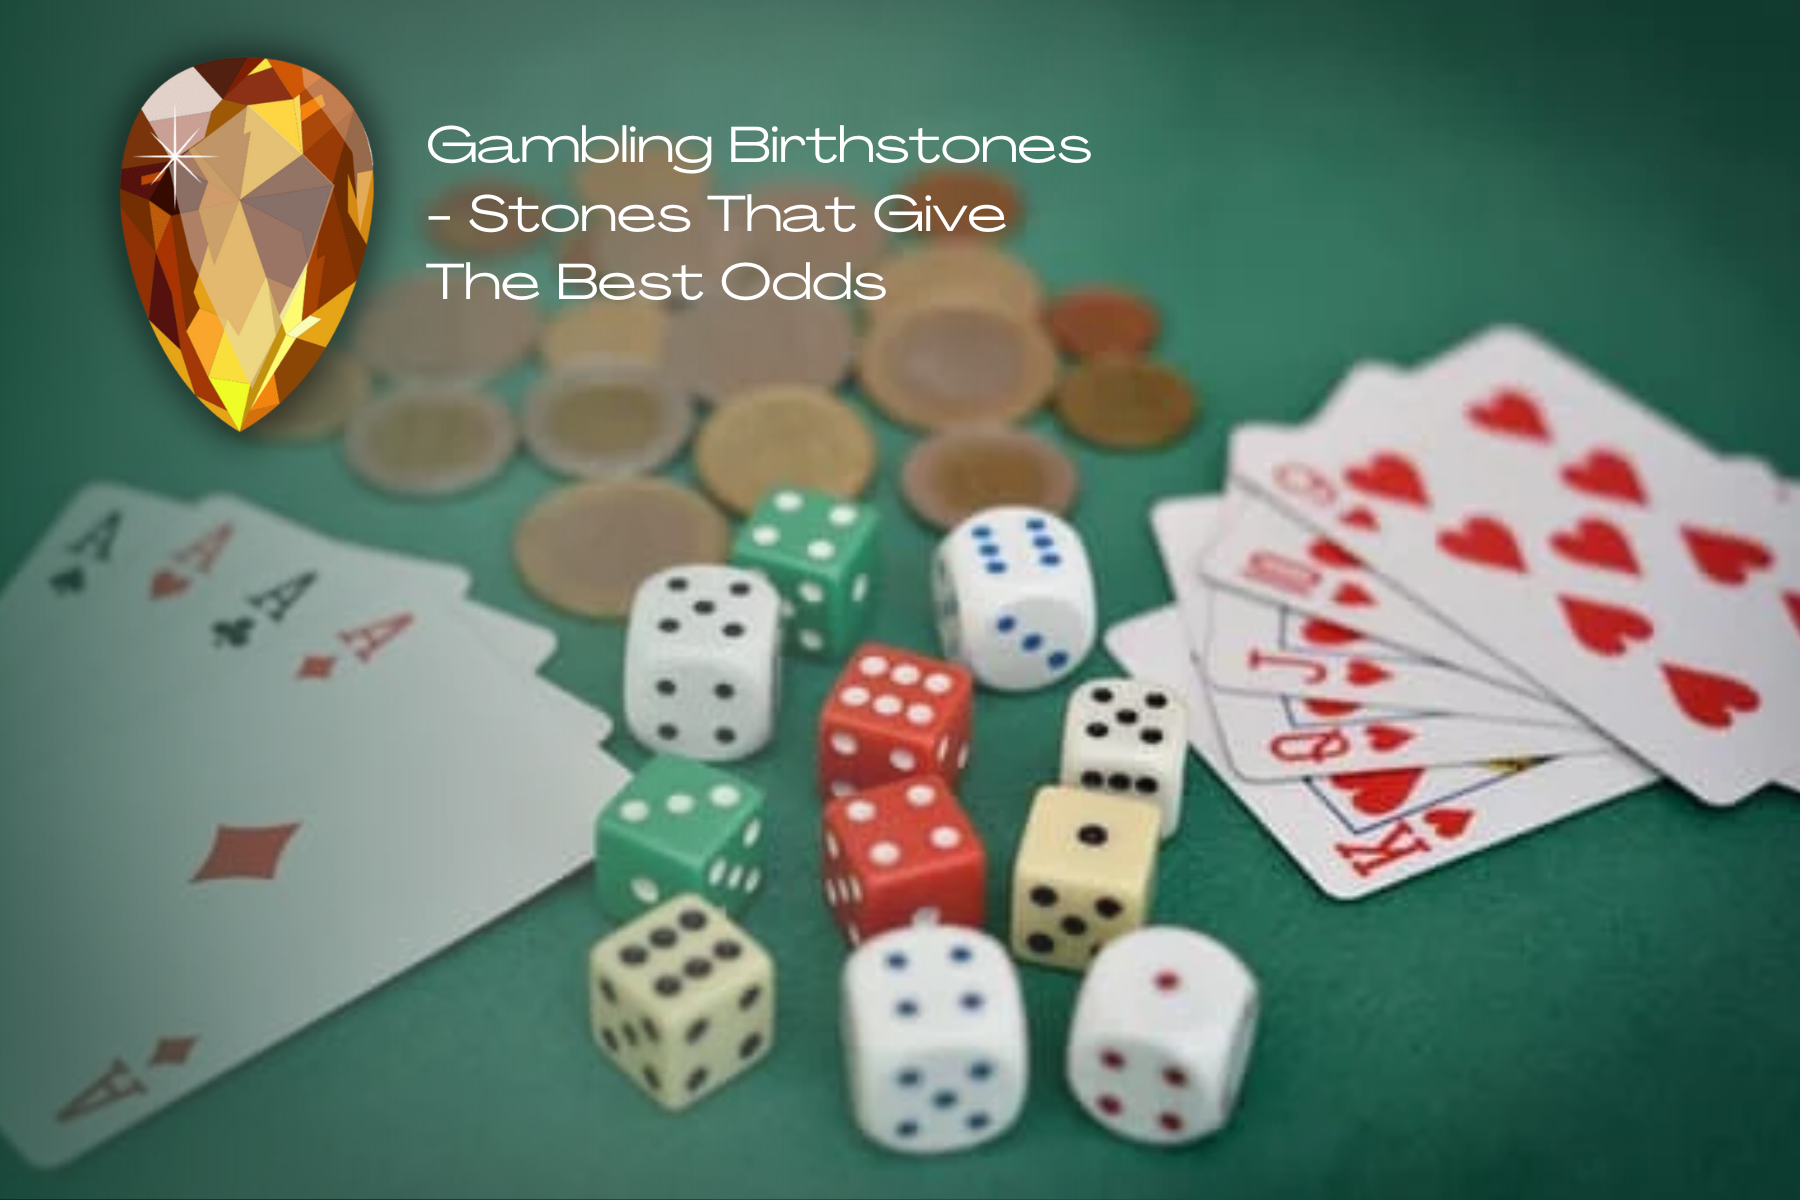 Gambling Birthstones - Stones That Give The Best Odds